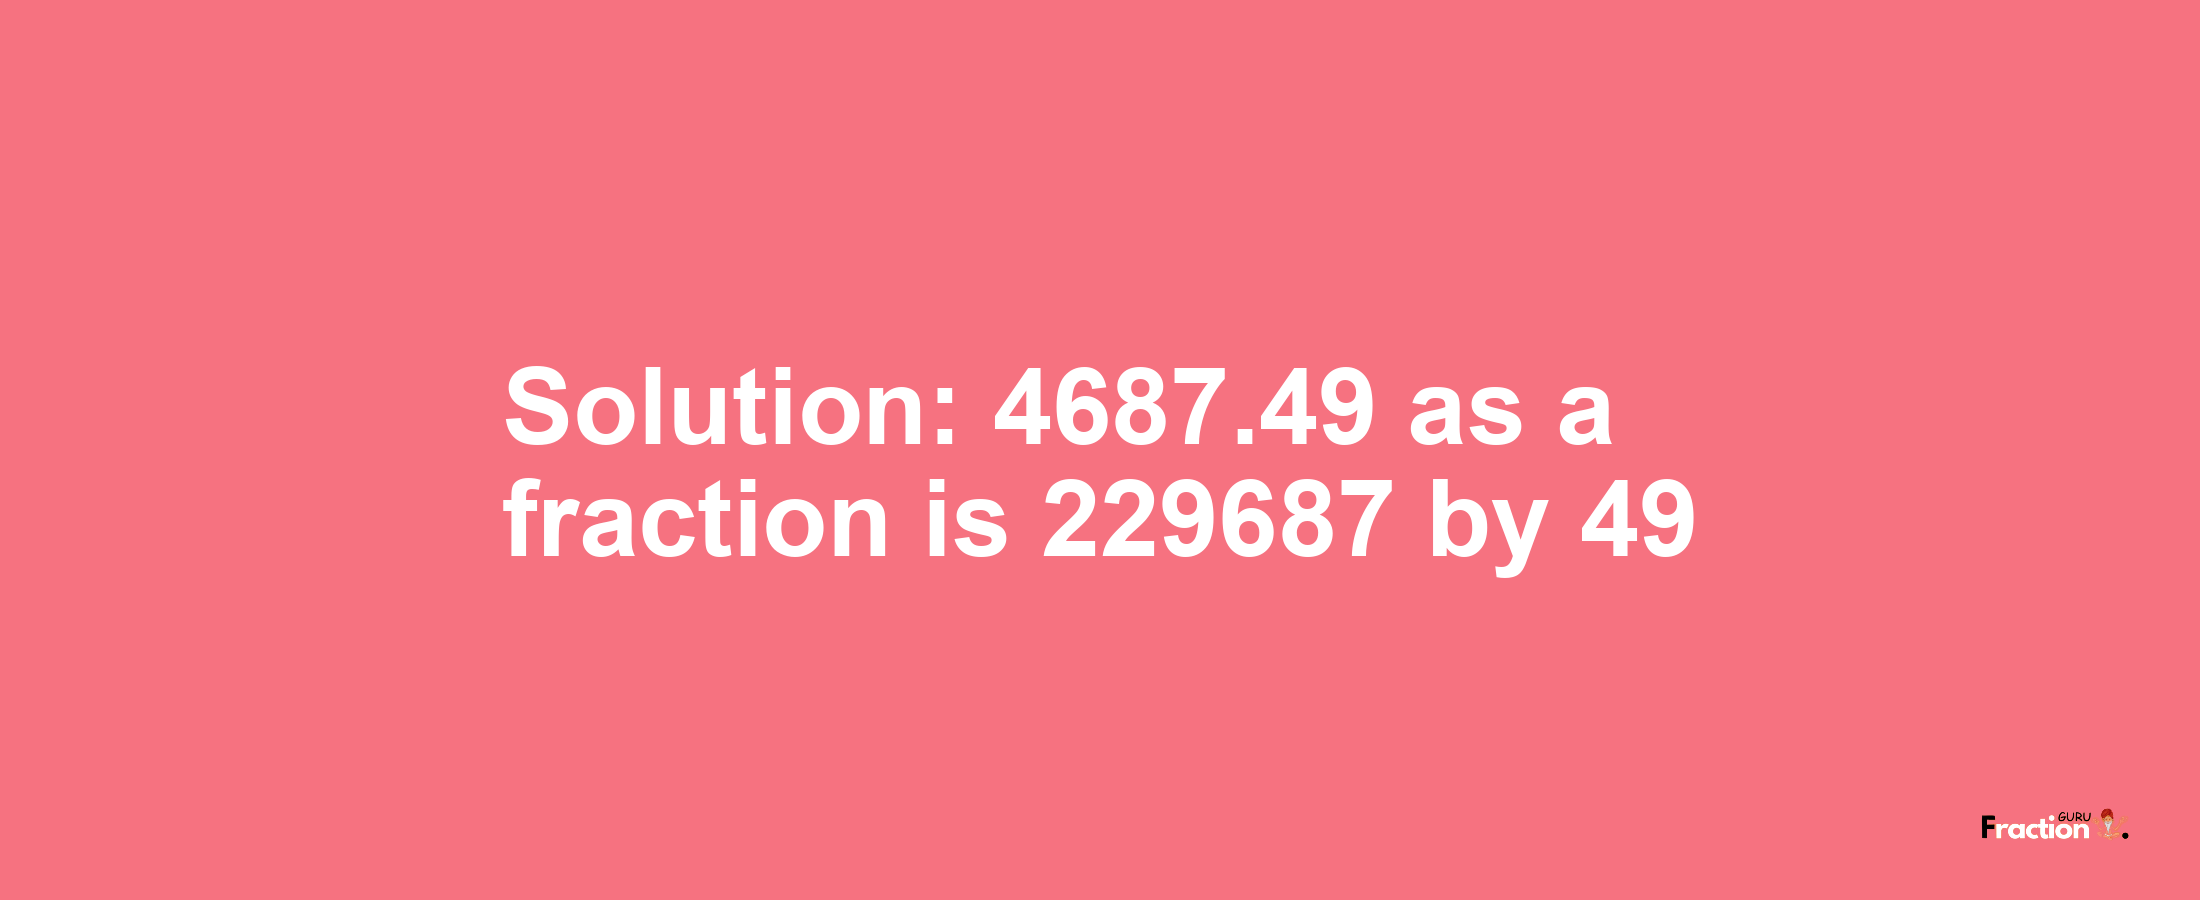 Solution:4687.49 as a fraction is 229687/49